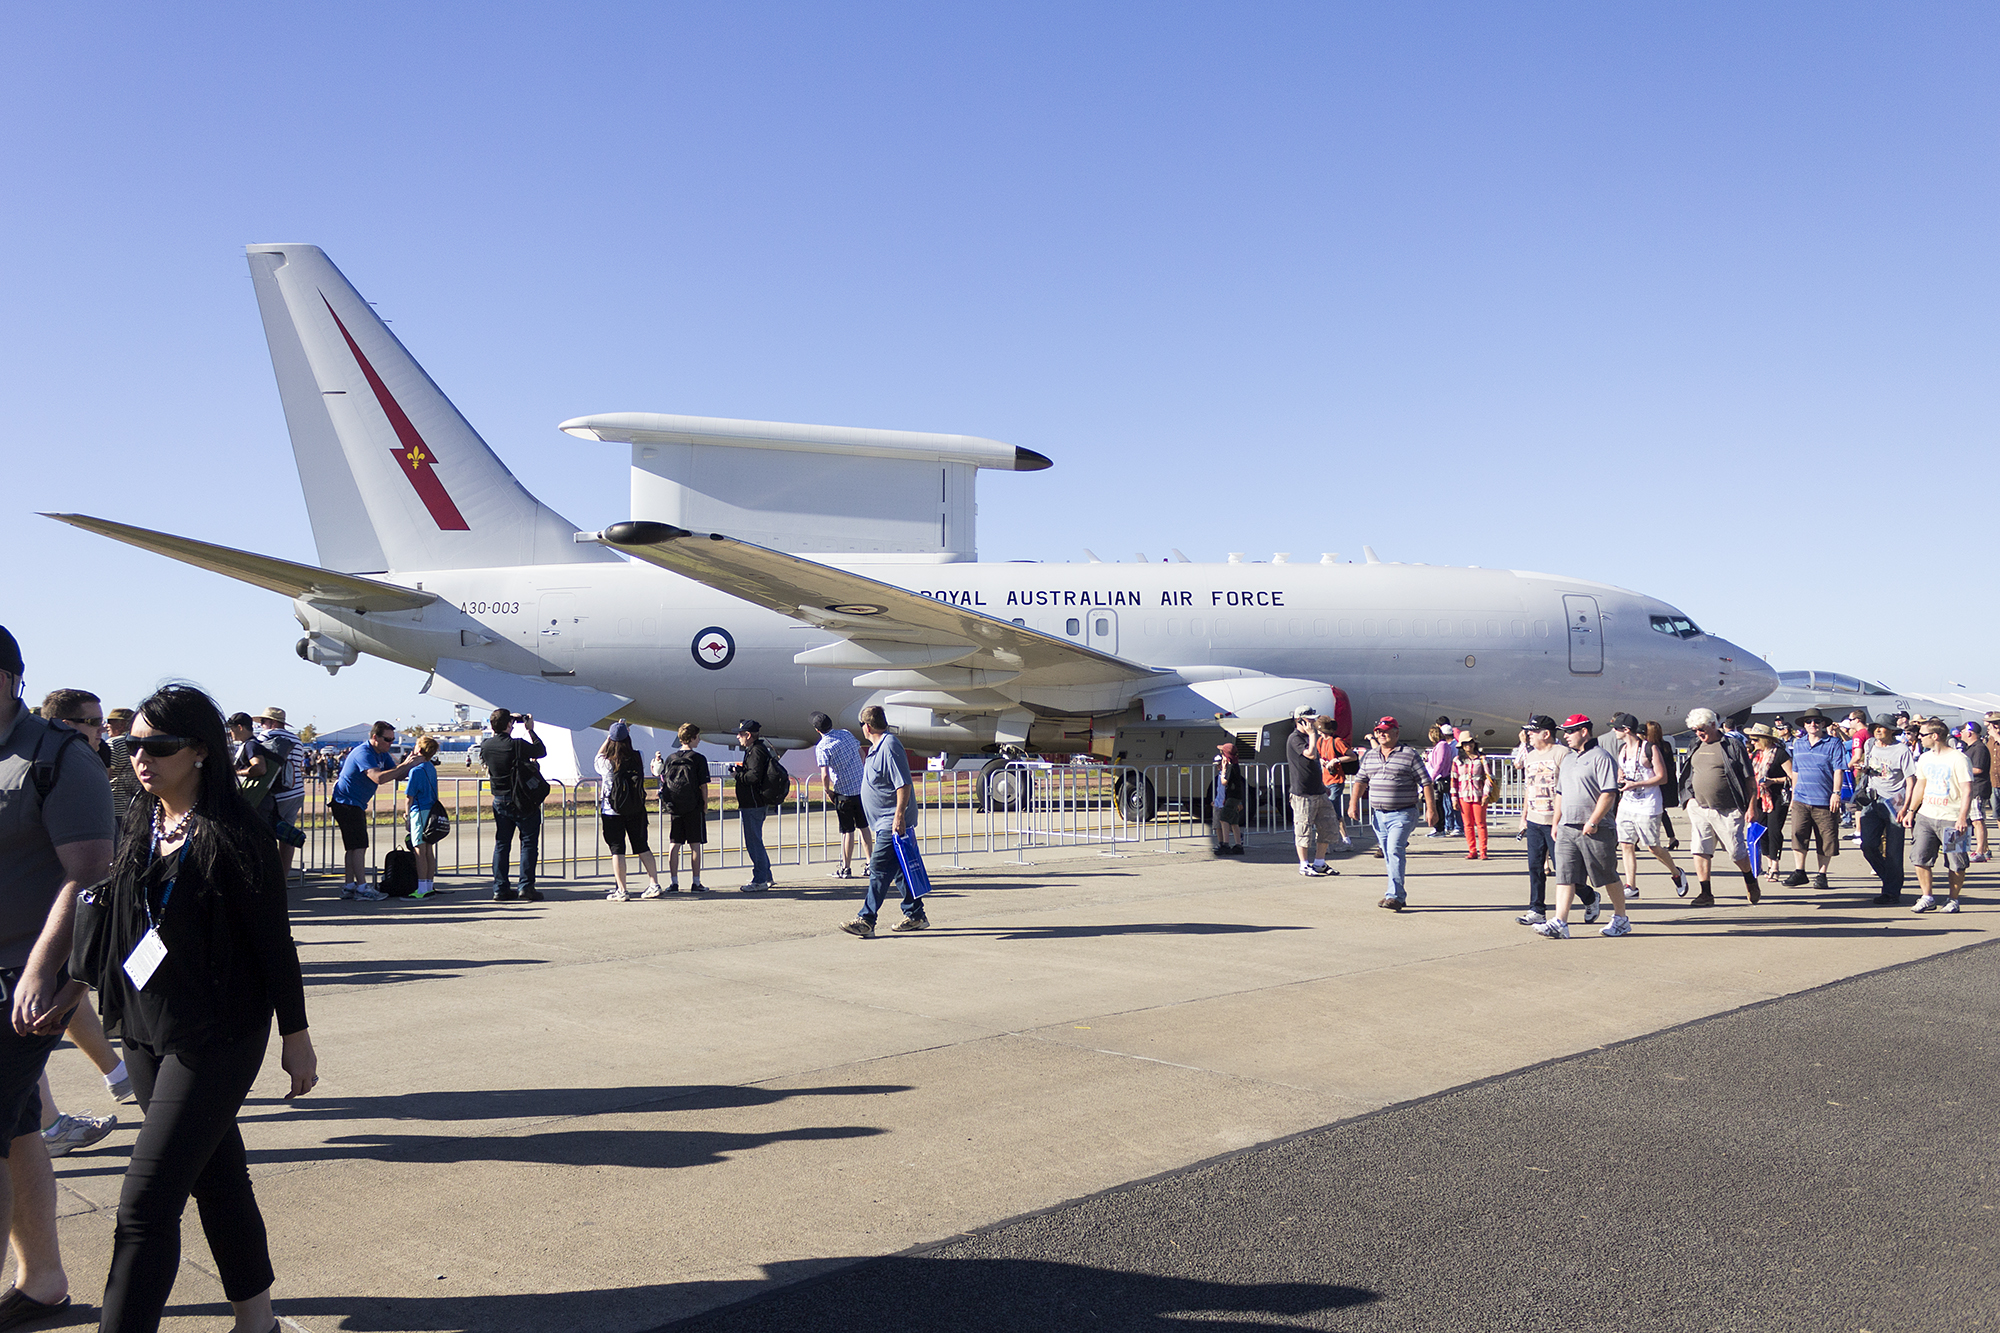 RAAF (A30-003) Boeing E-7A Wedgetail on display at the 2013 Australian International Airshow